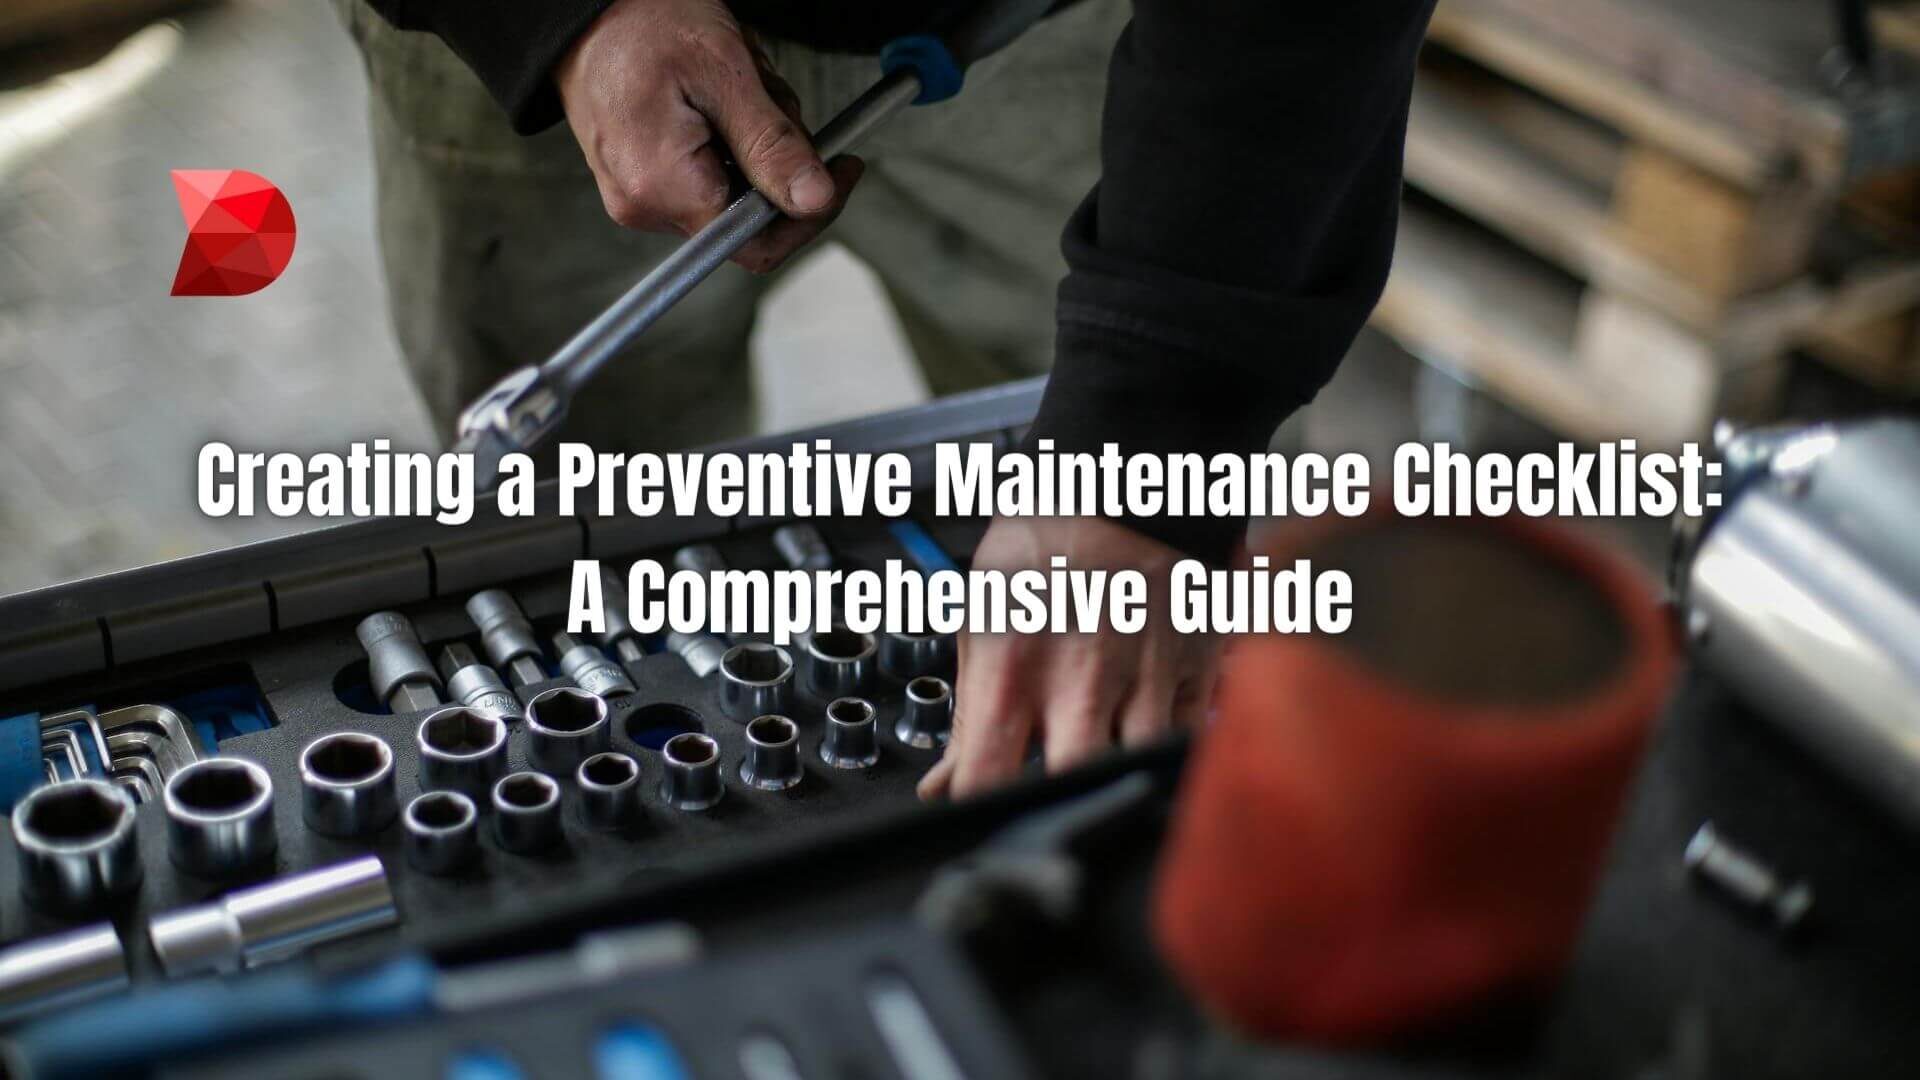 Ensure smooth operations and minimize downtime! Click here to learn how to build an effective preventive maintenance checklist.